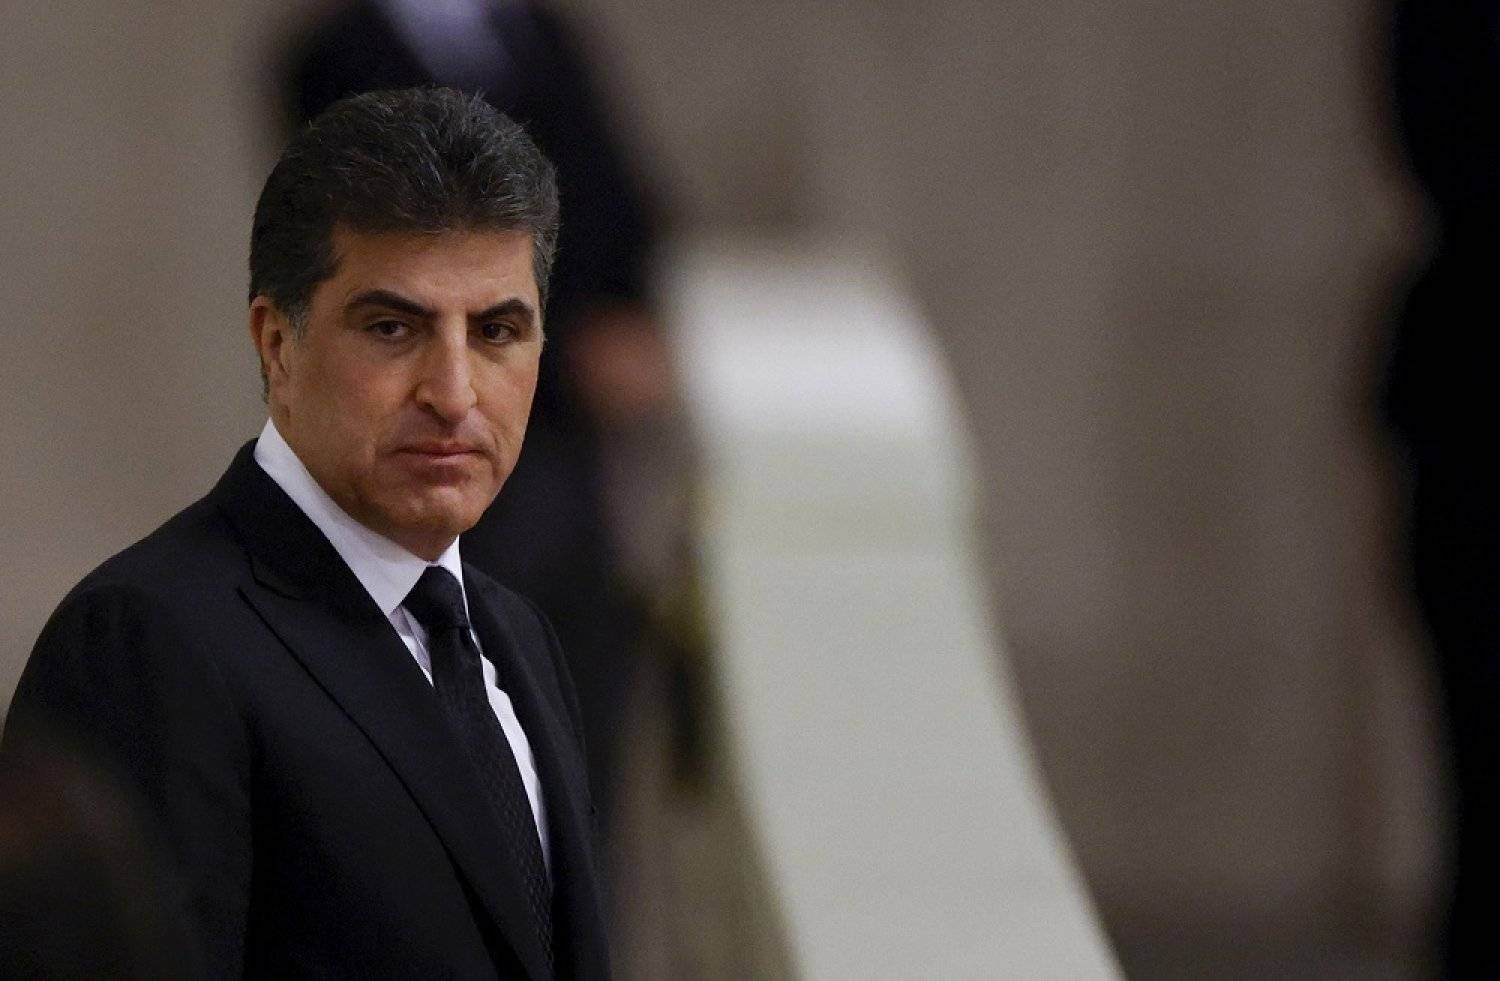 President of the Kurdistan Region in Iraq, Nechirvan Barzani pays his respects to Britain's Queen Elizabeth II, following her death, during her lying in state at Westminster Hall, in Westminster Palace, in London, Sunday, Sept. 18, 2022. (AP) 